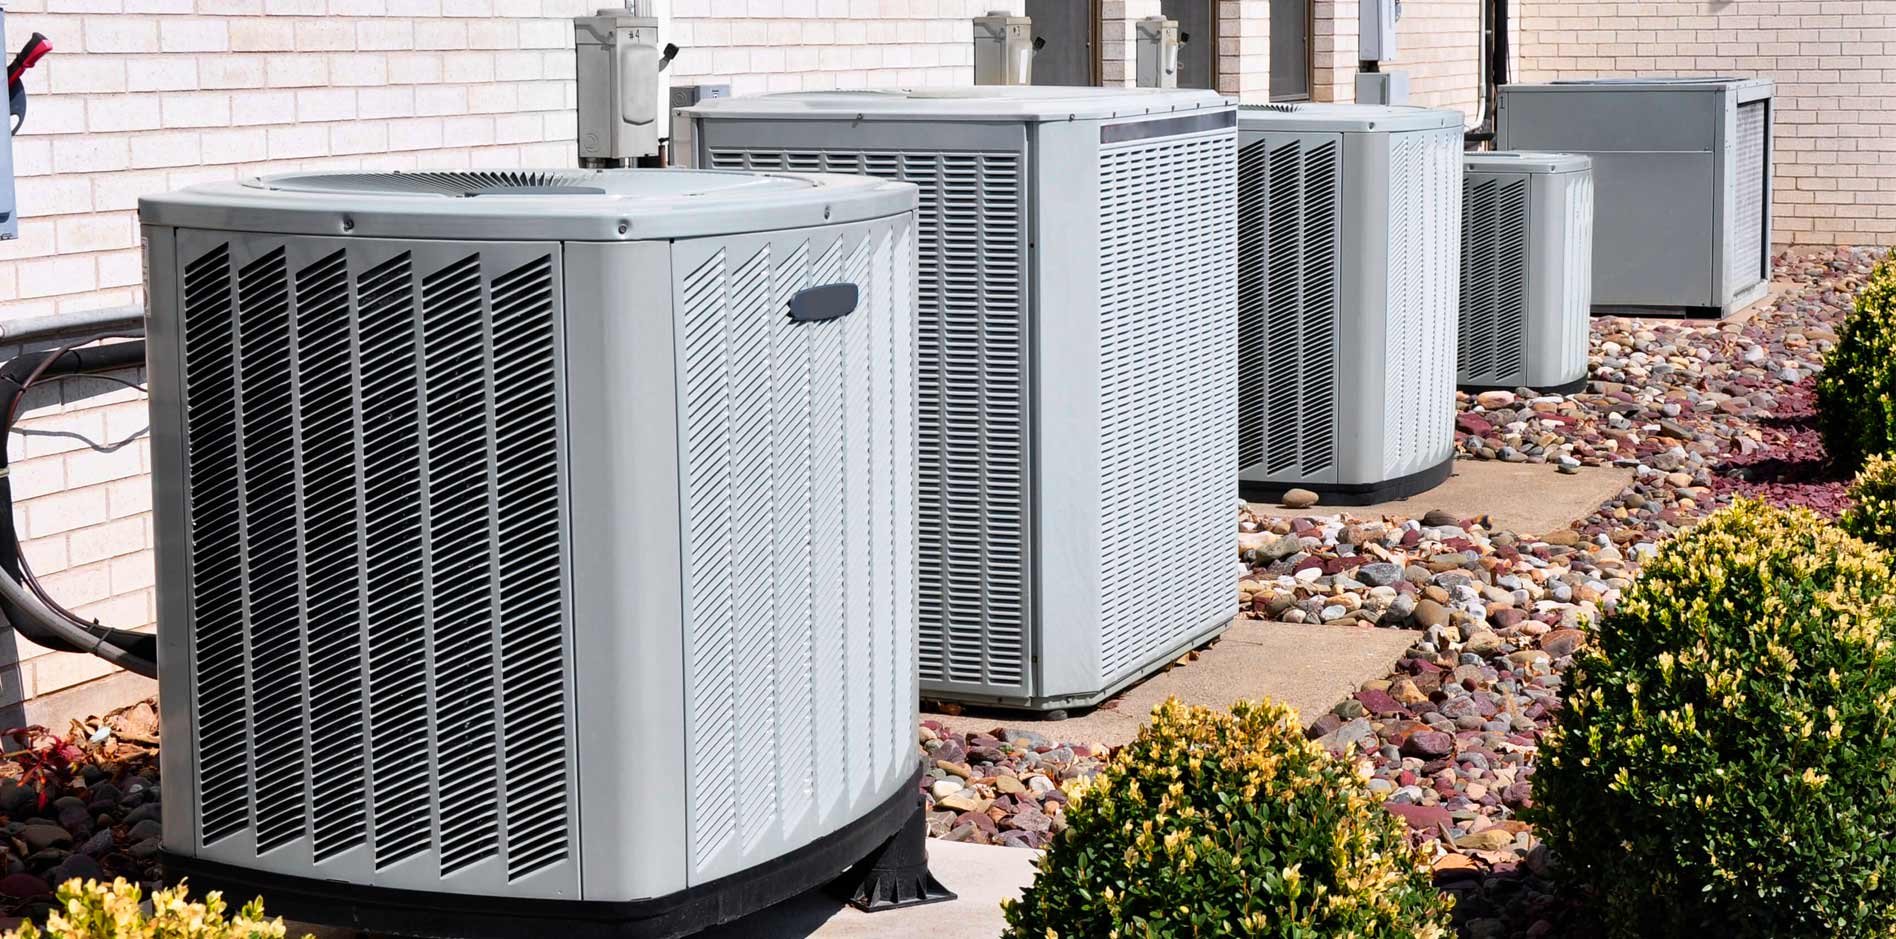 Air Conditioning Contractors in Union City, NJ 07087